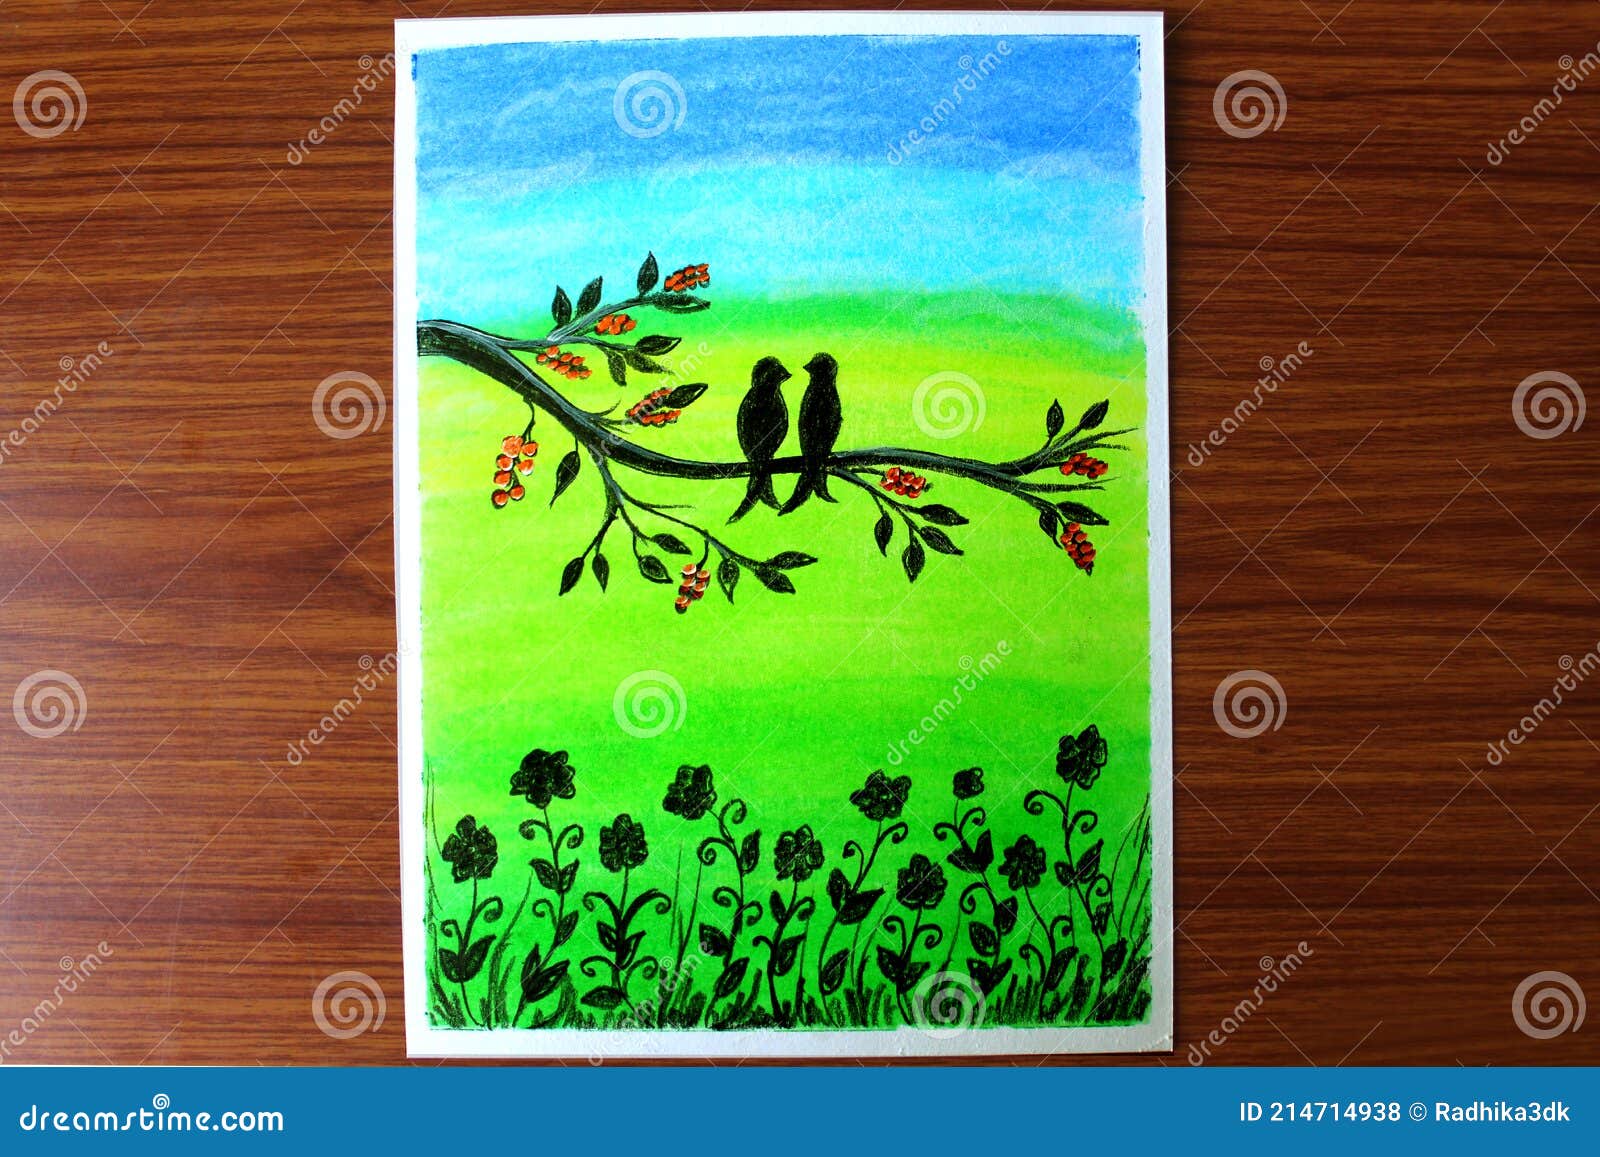 Love Bird Scenery with Green Nature Stock Photo - Image of drawing ...